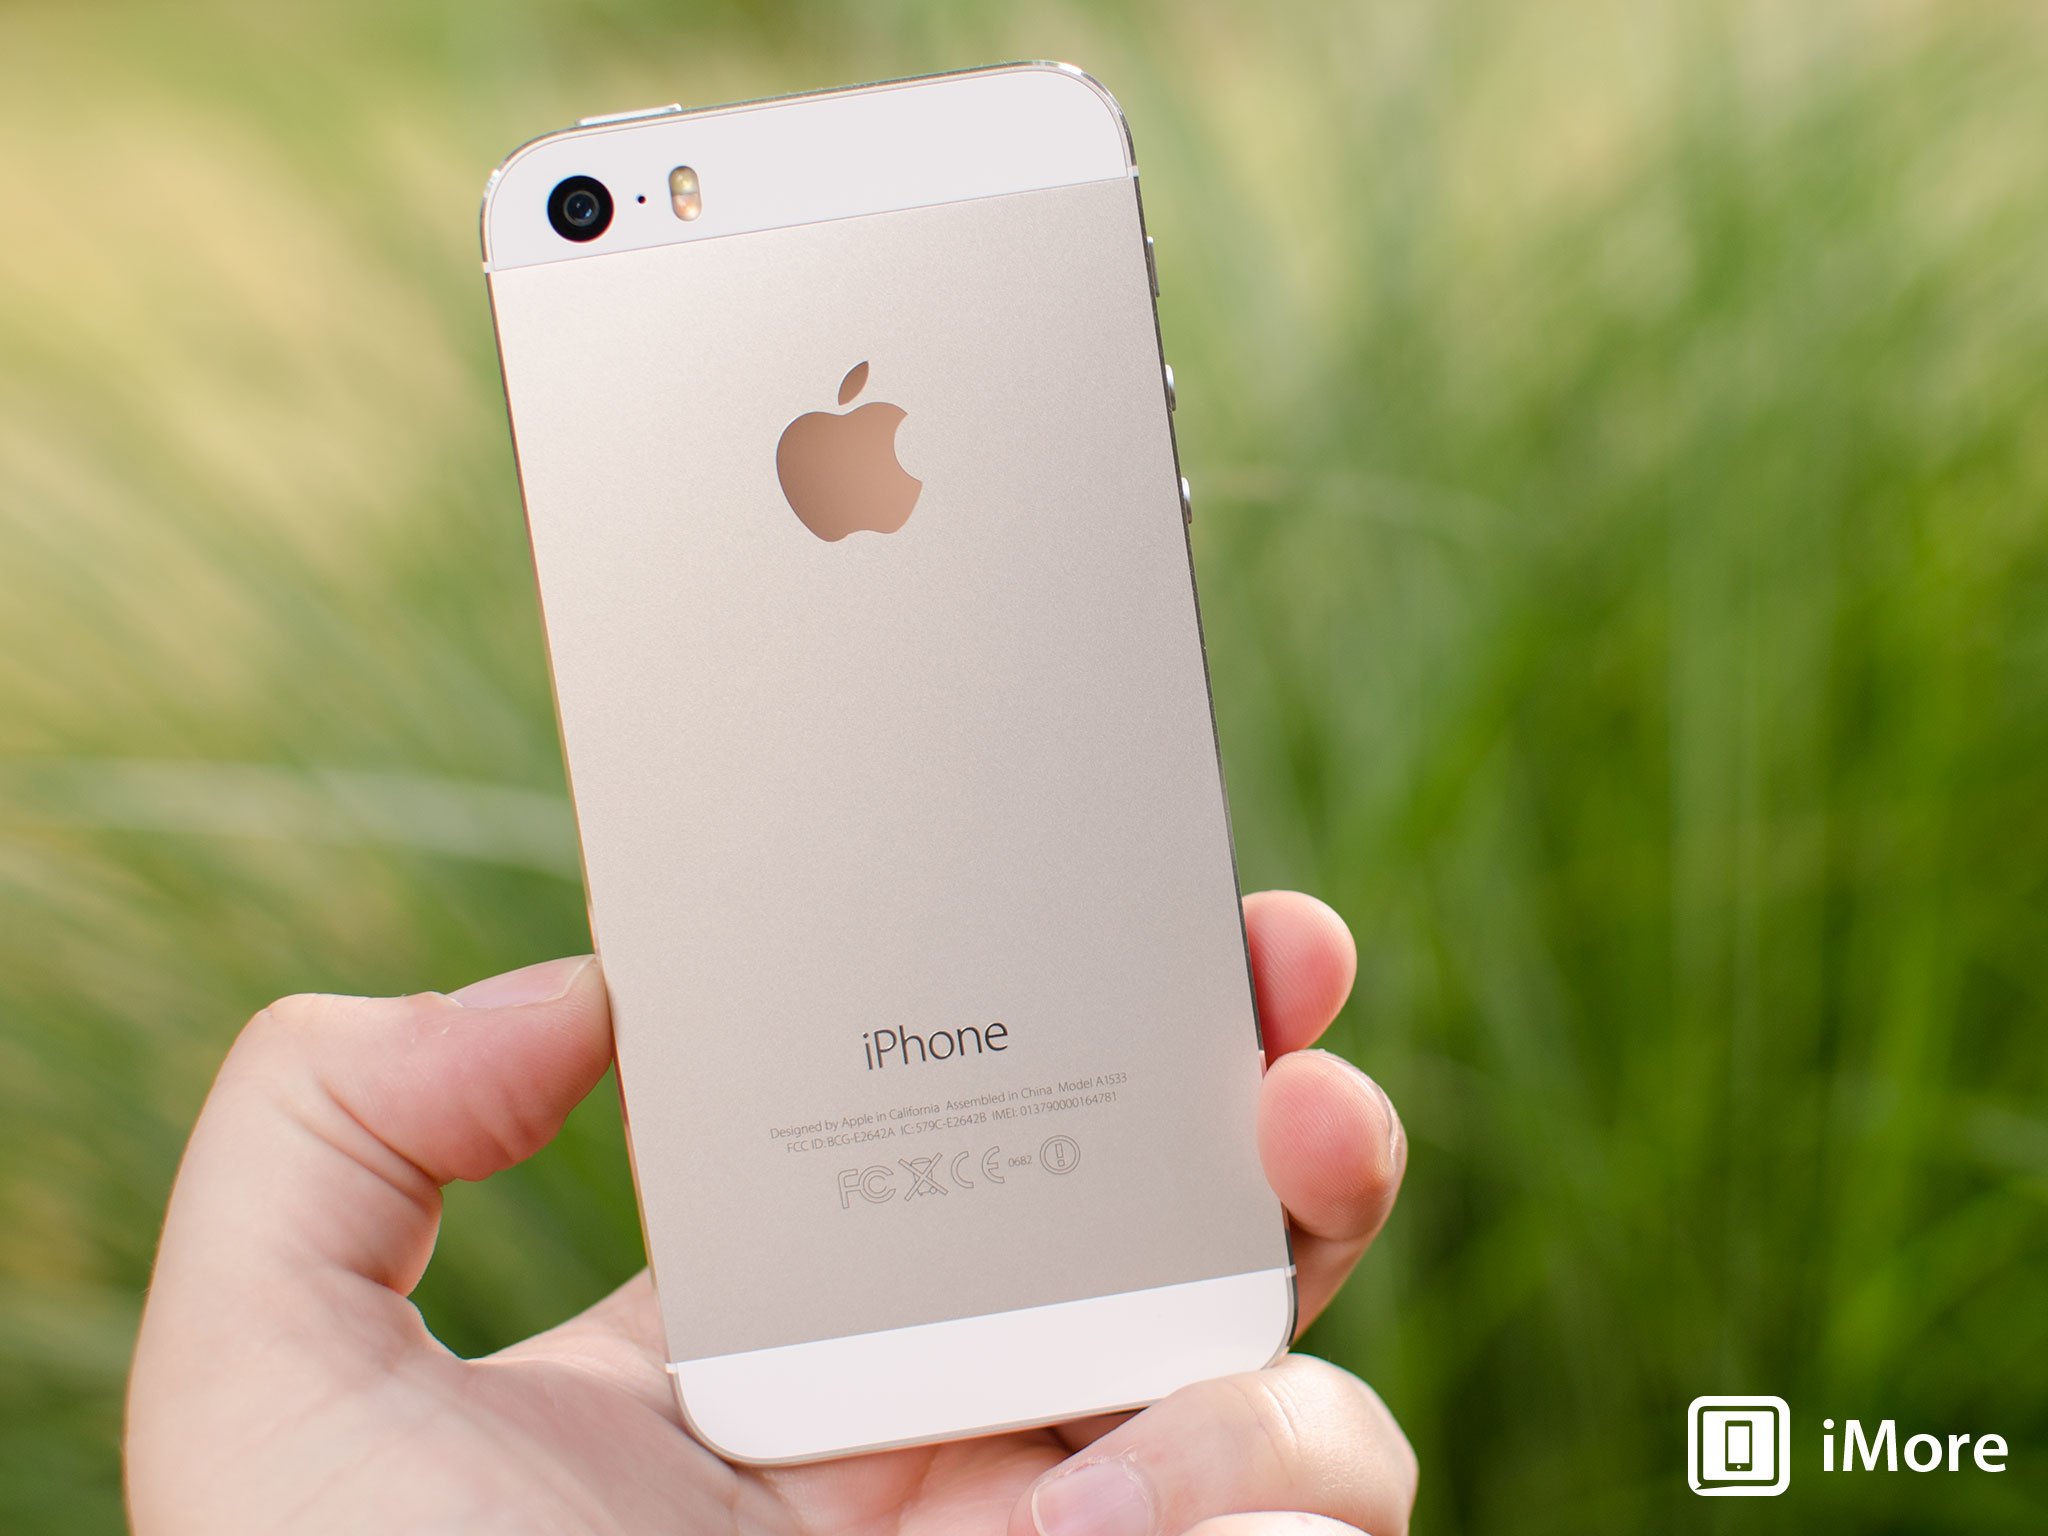 iphone 5s color silver